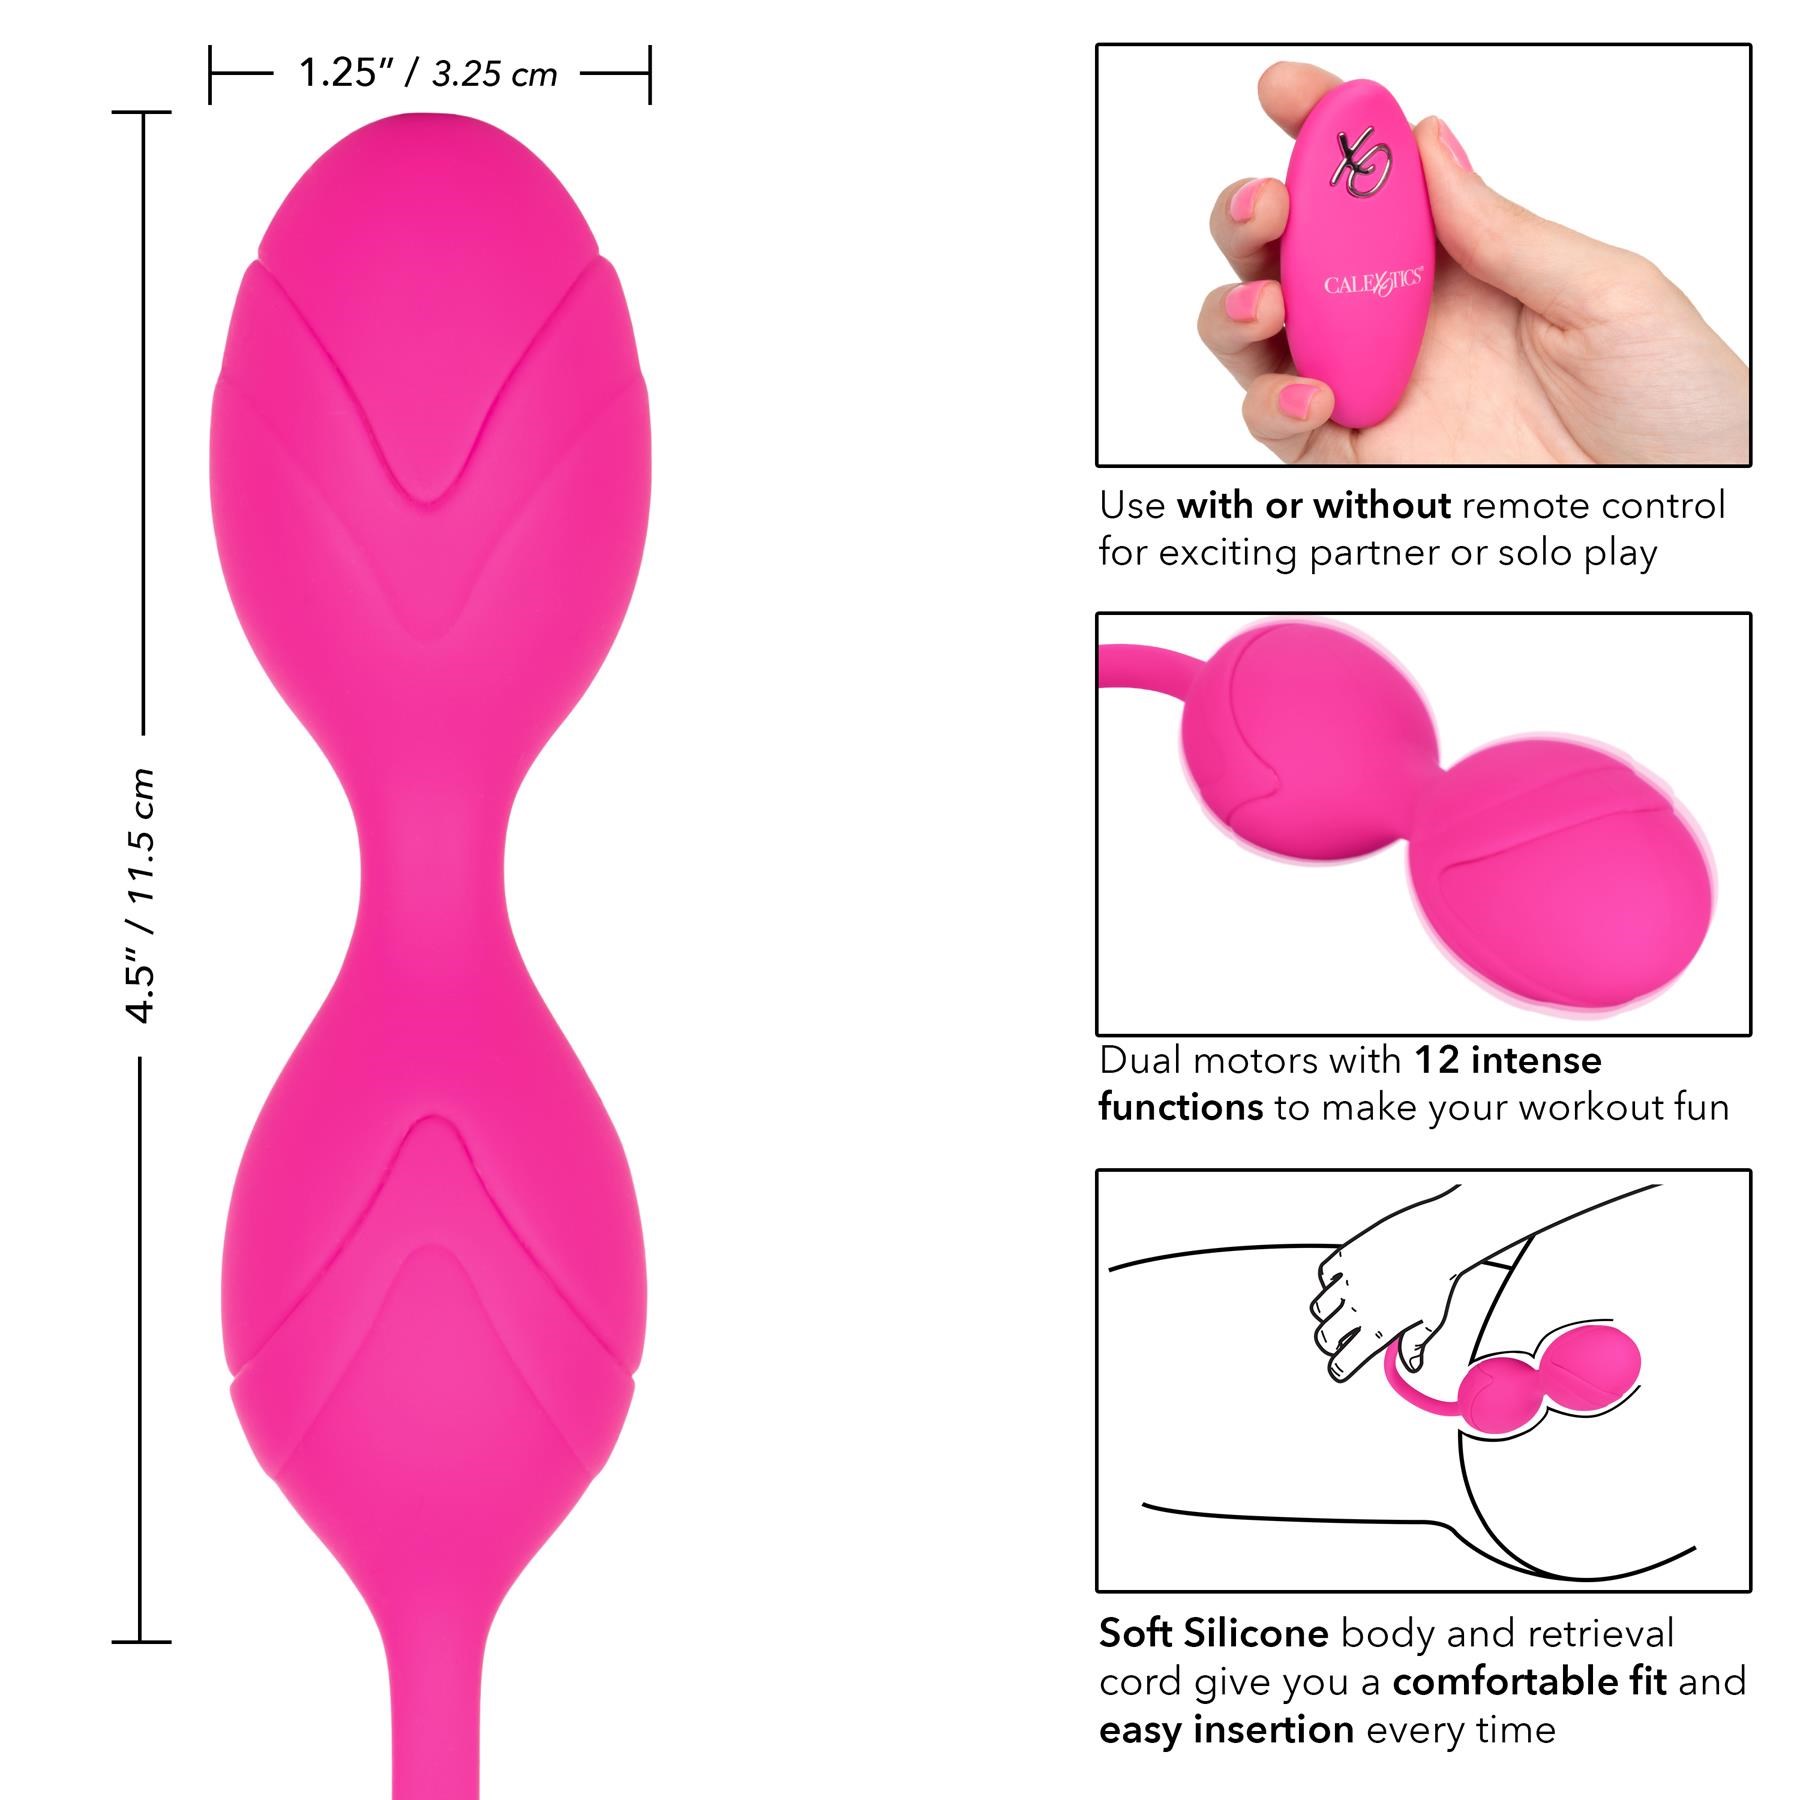 Remote Dual Motor Vibrating Kegel Exerciser - Dimensions and Instructions